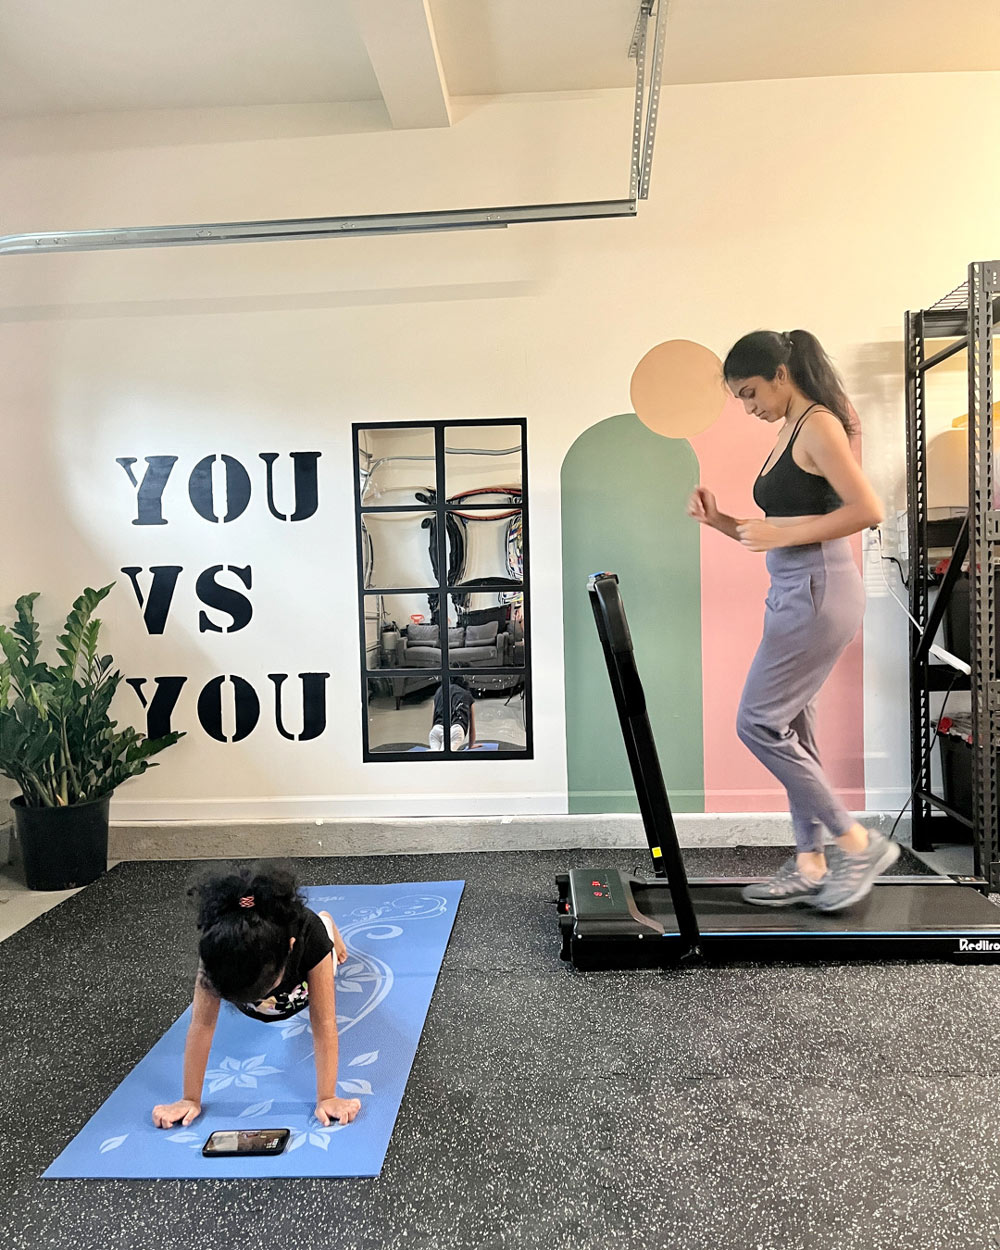 Two people using the gym space.